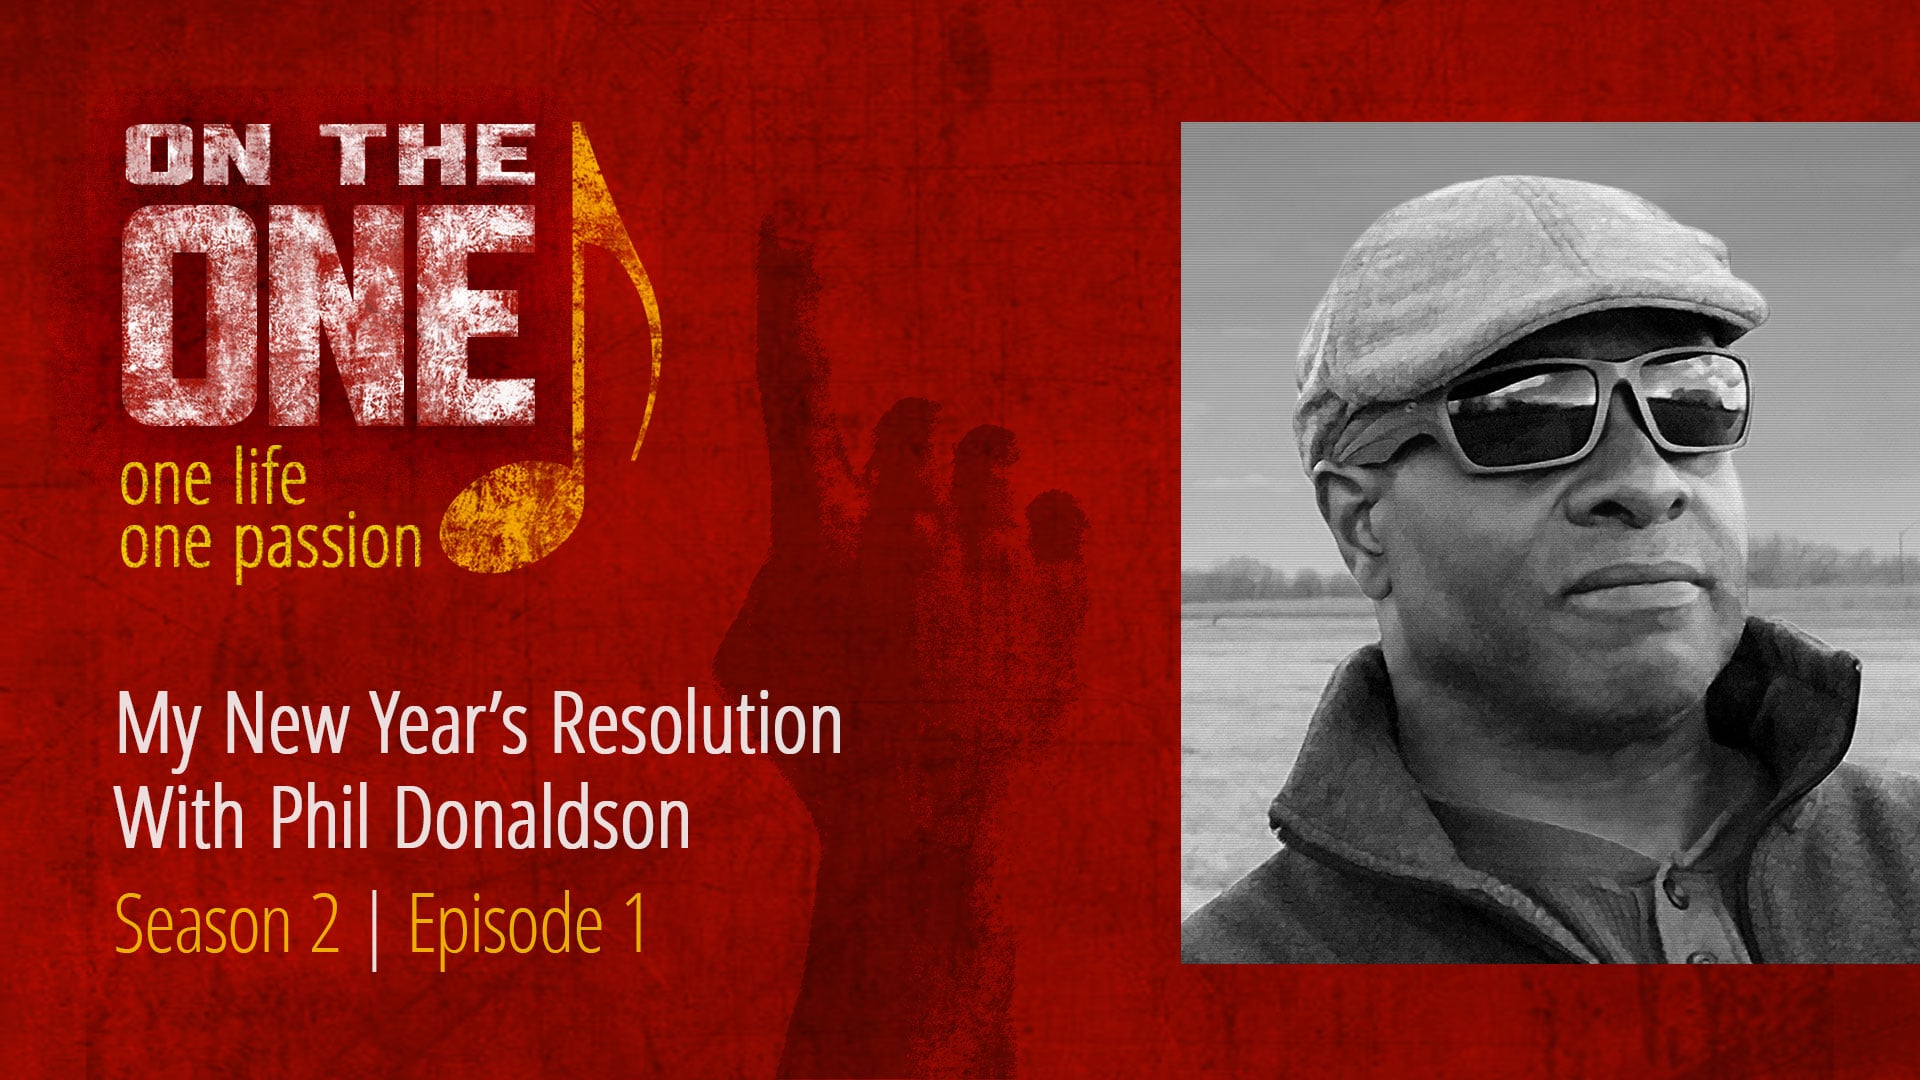 My New Year's Resolution with Phil Donaldson, On The One podcast.